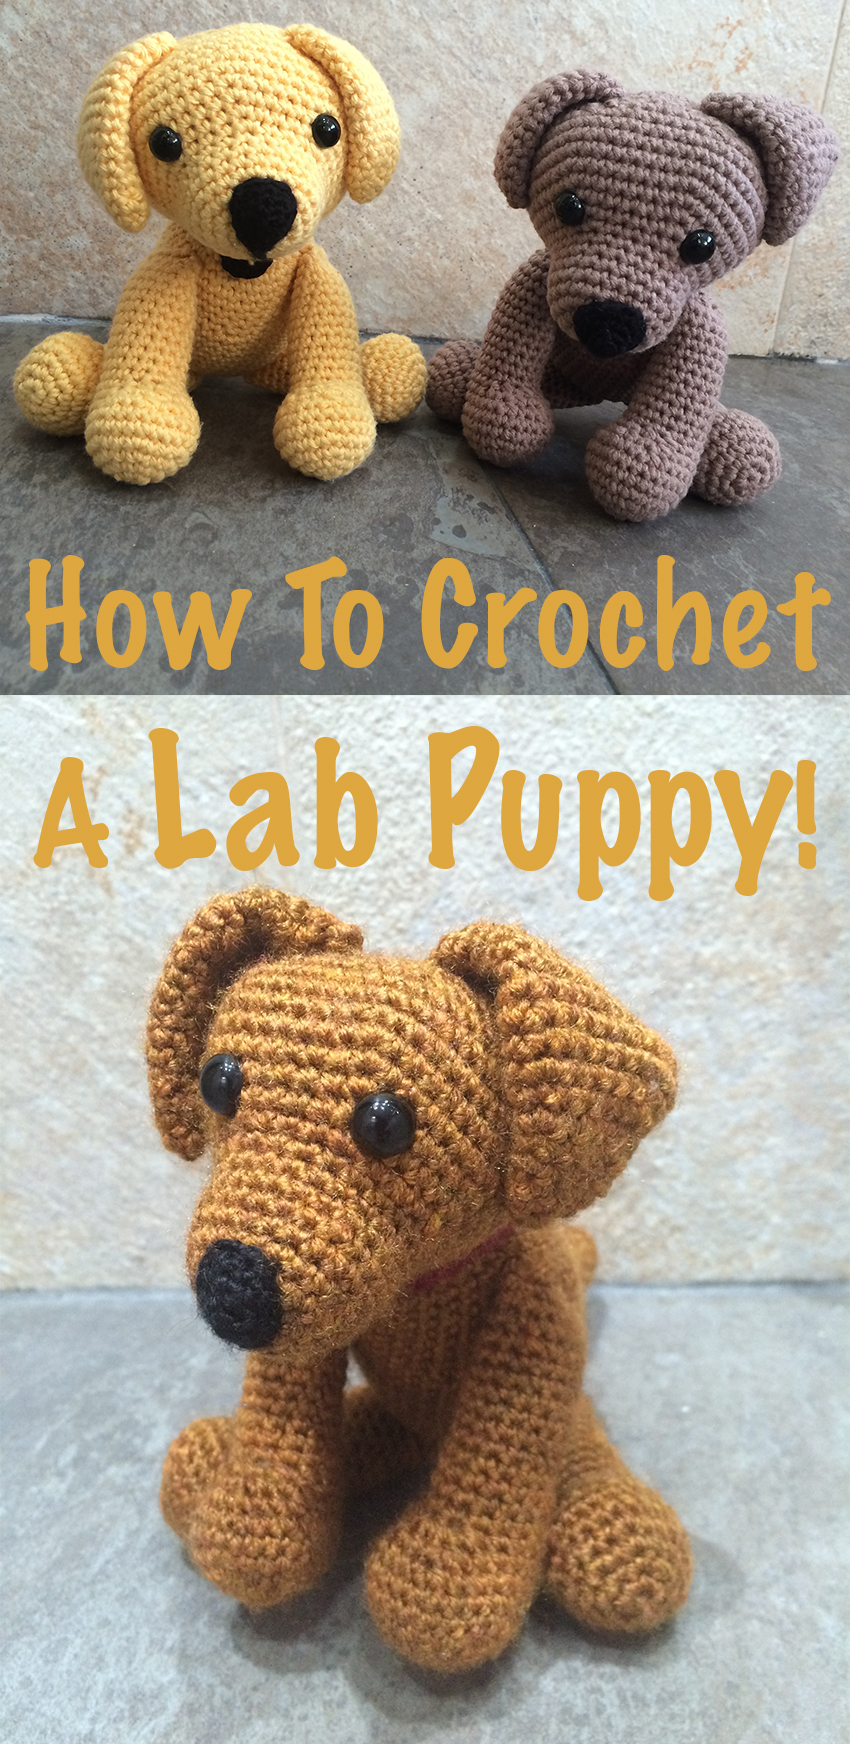 How To Crochet A Lab Puppy Toy. Your Free Crochet Labrador Pattern.